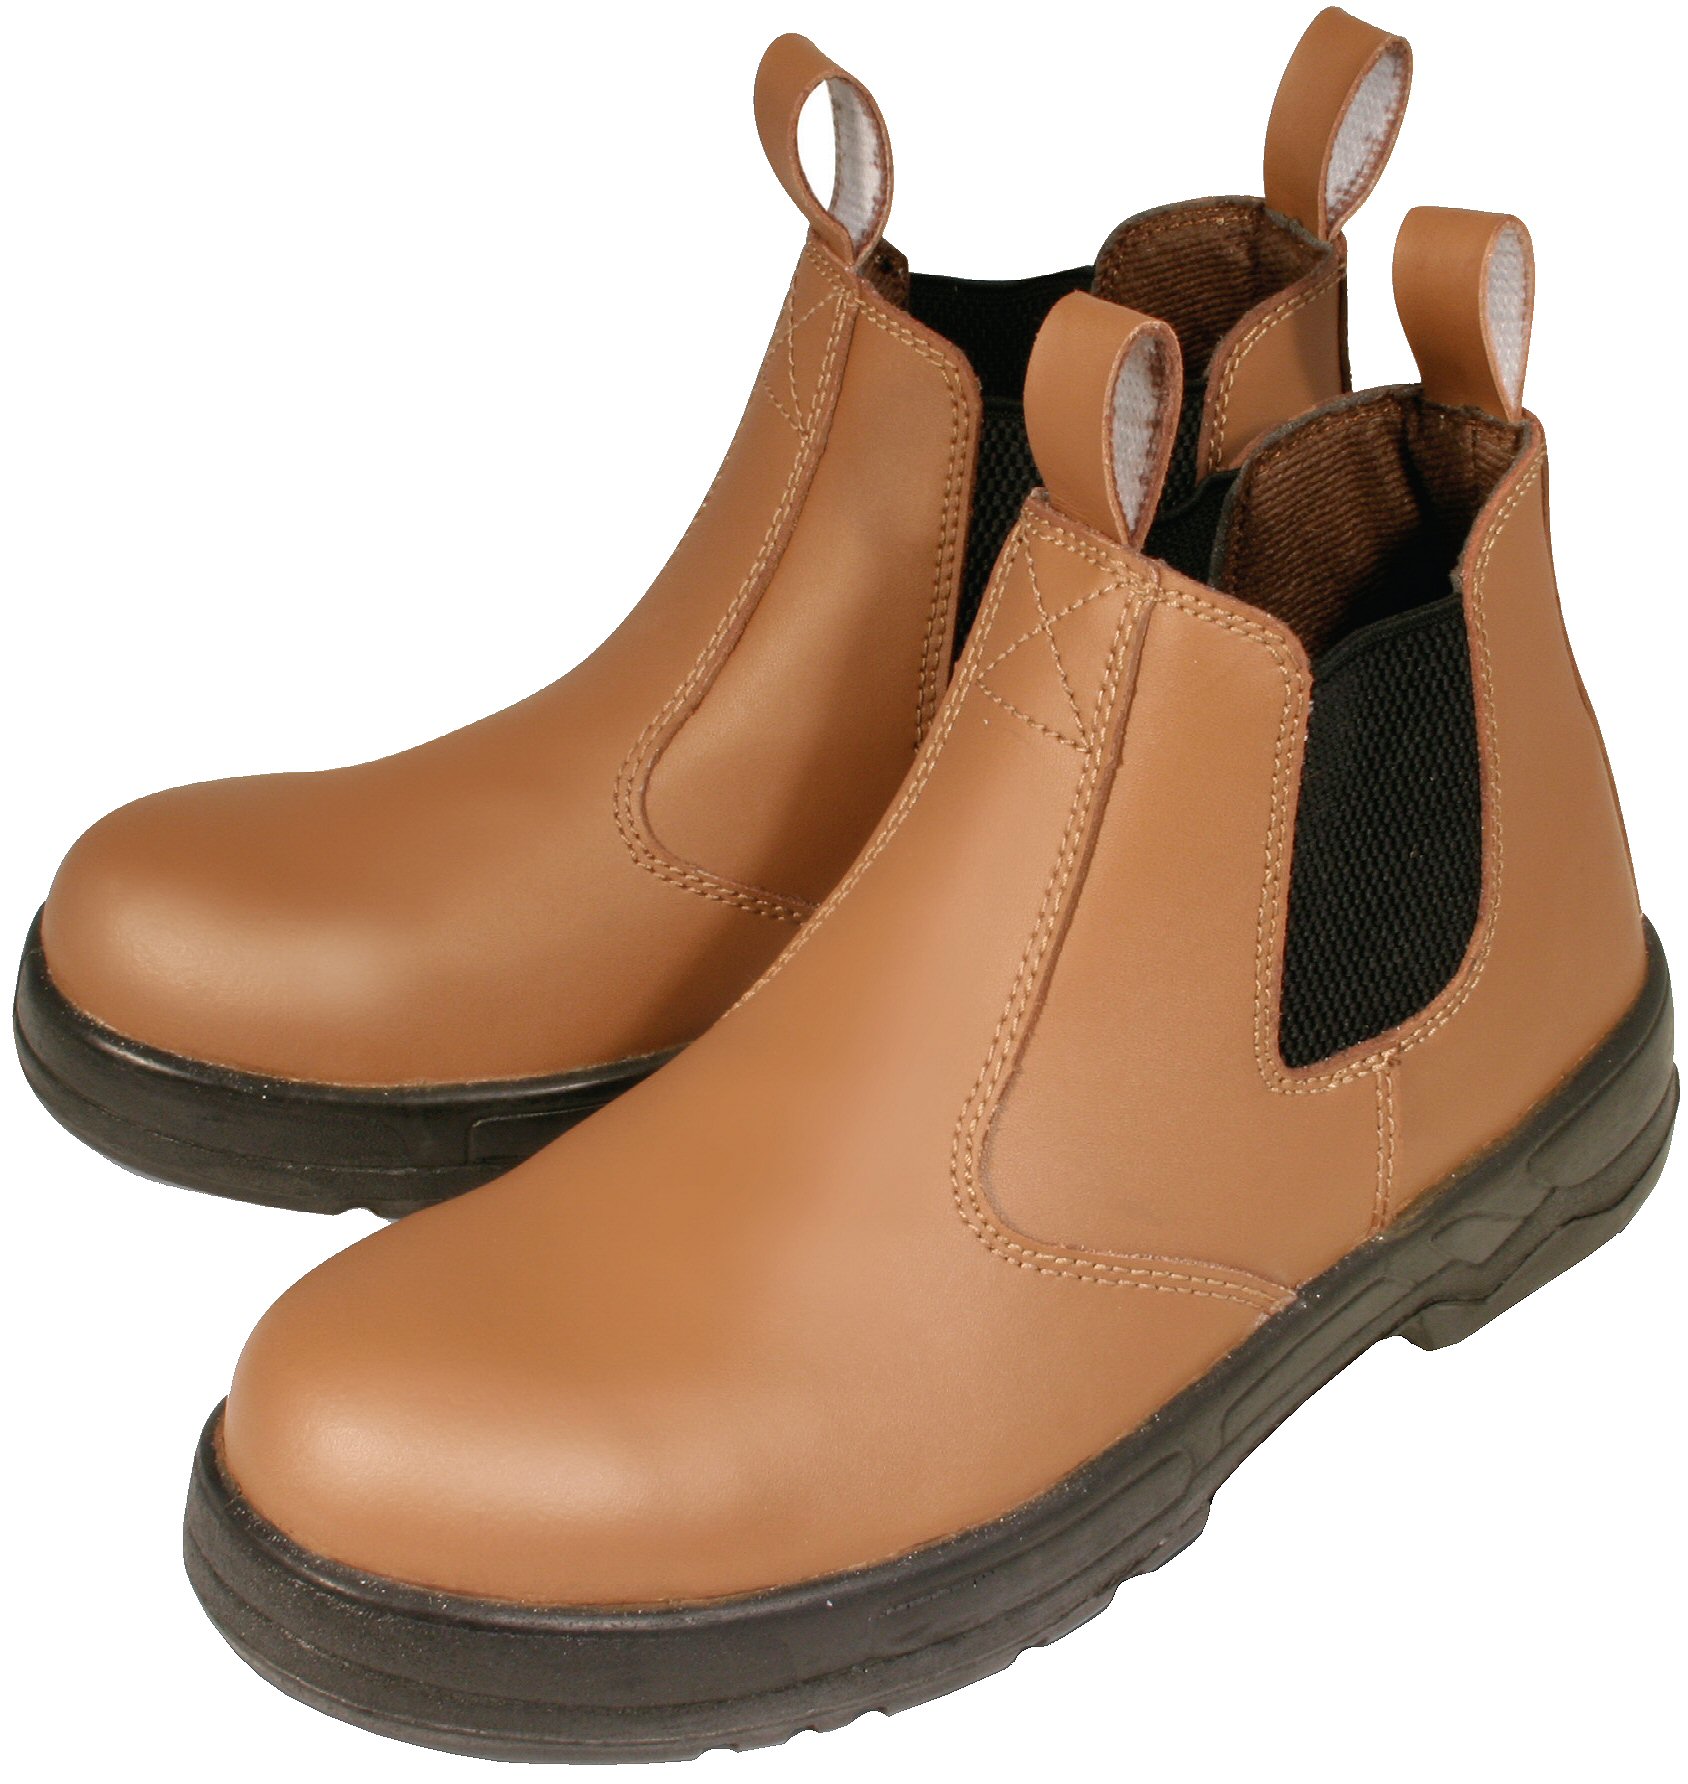 Chelsea Safety Boot